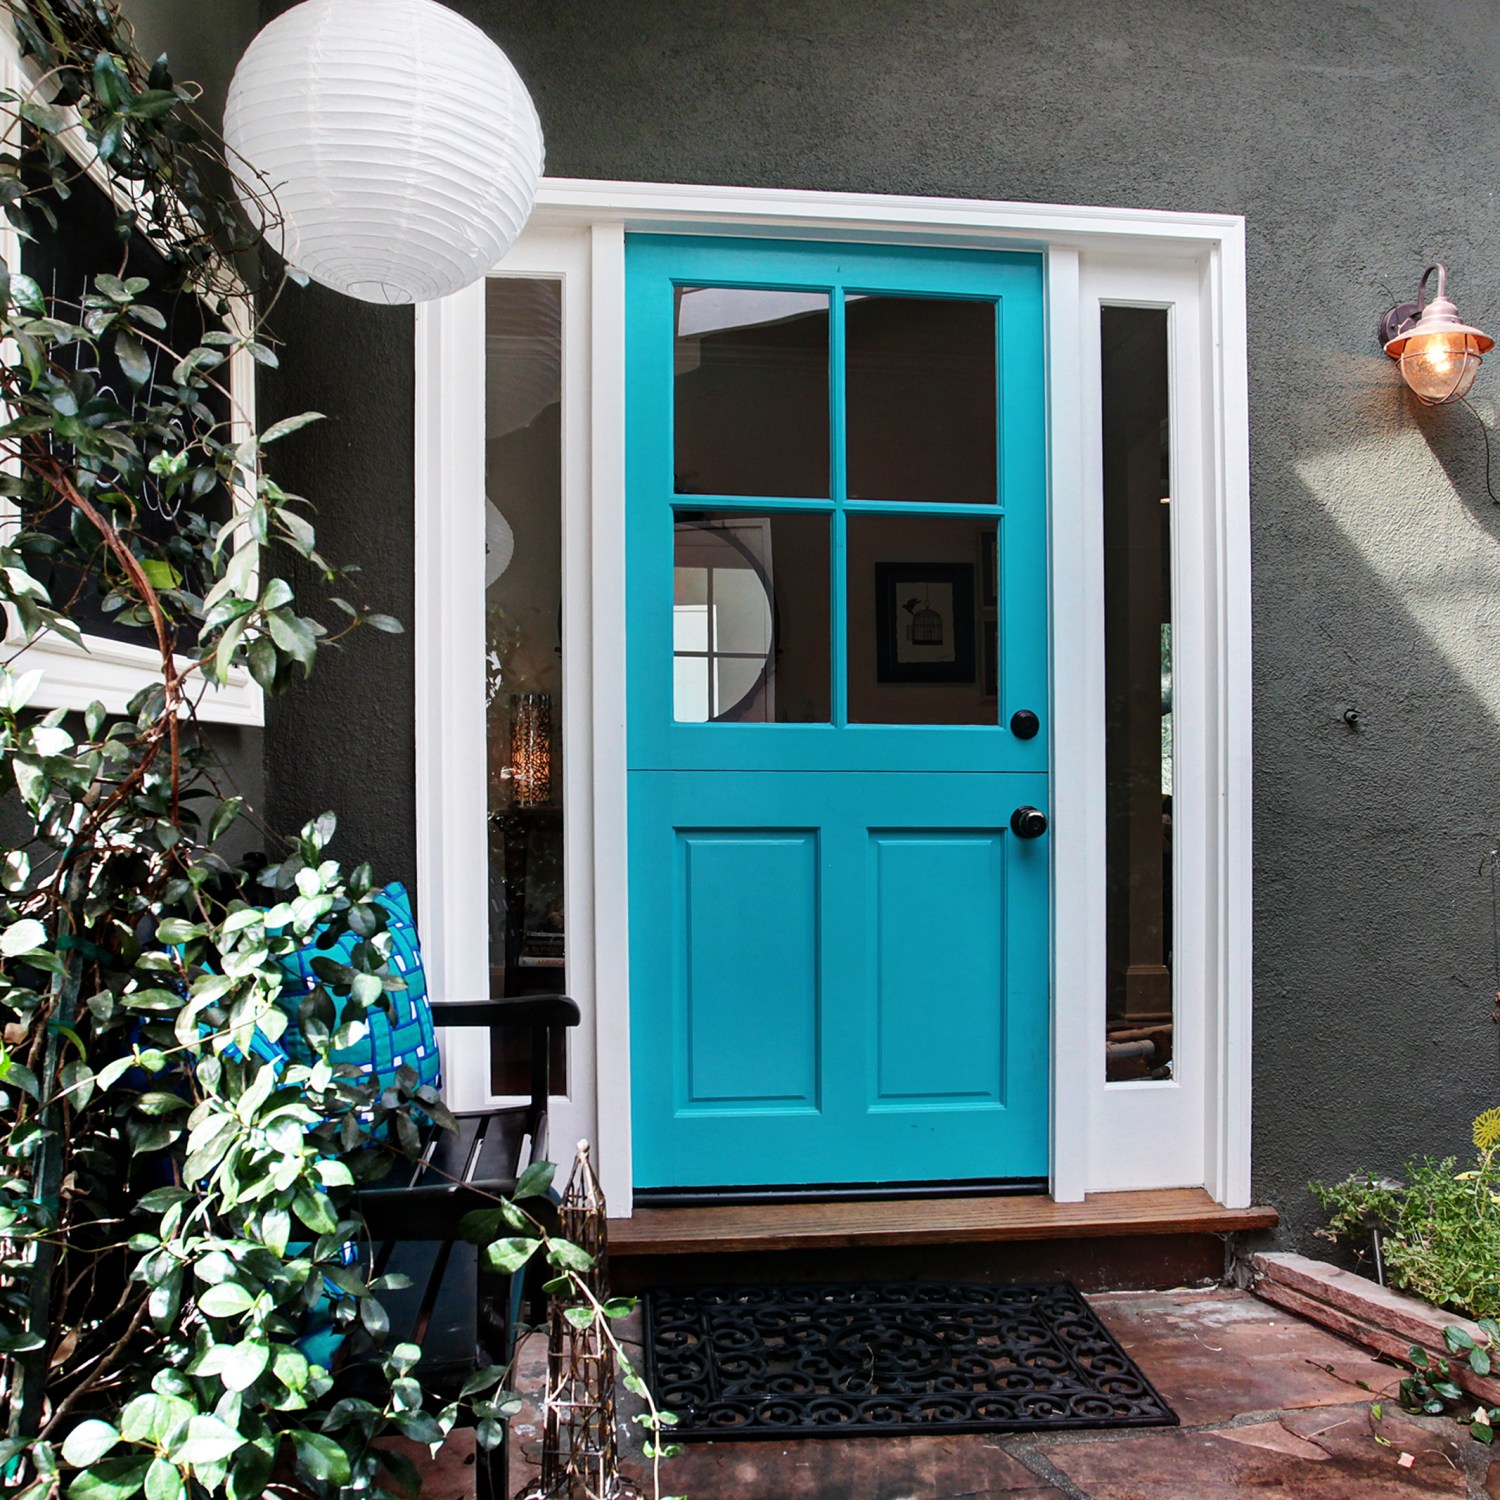 Colorfully painted front door